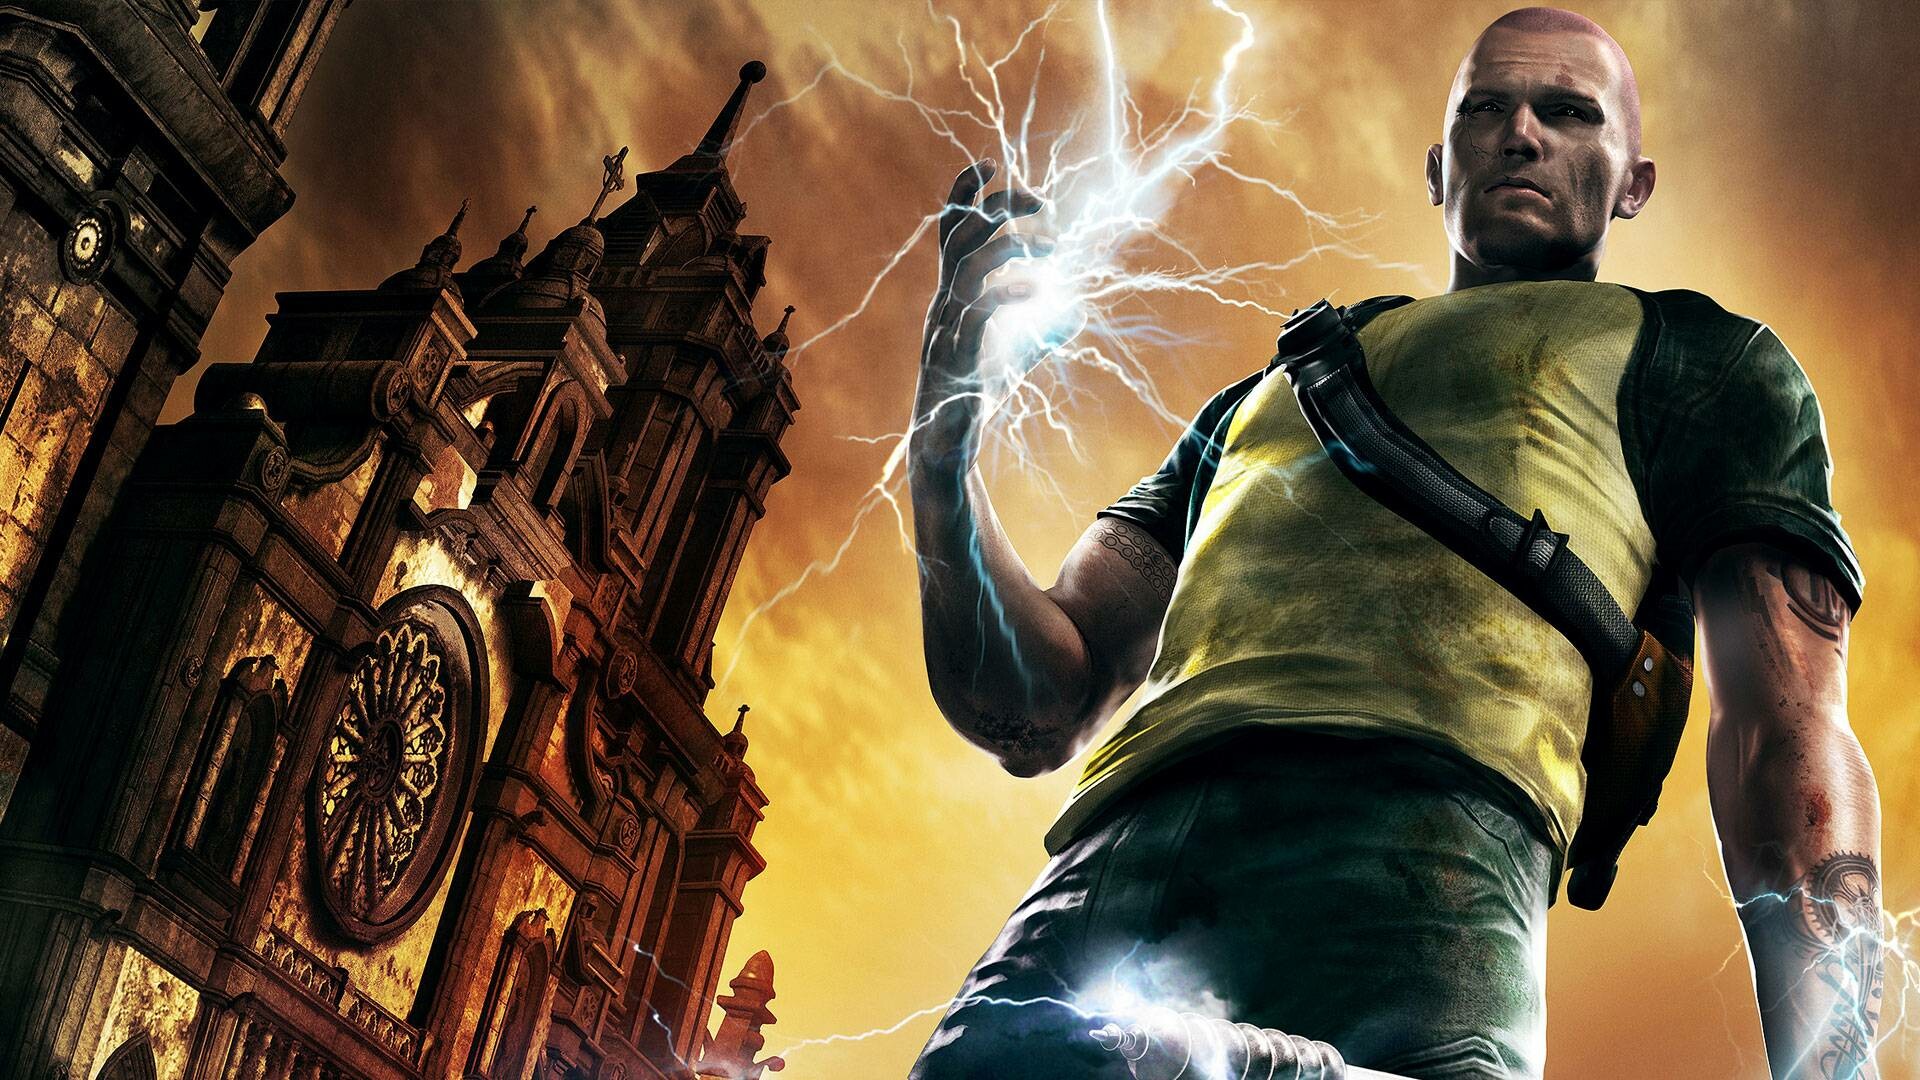 inFAMOUS: The player controls Cole in the world of New Marais, Electricity-based powers. 1920x1080 Full HD Wallpaper.